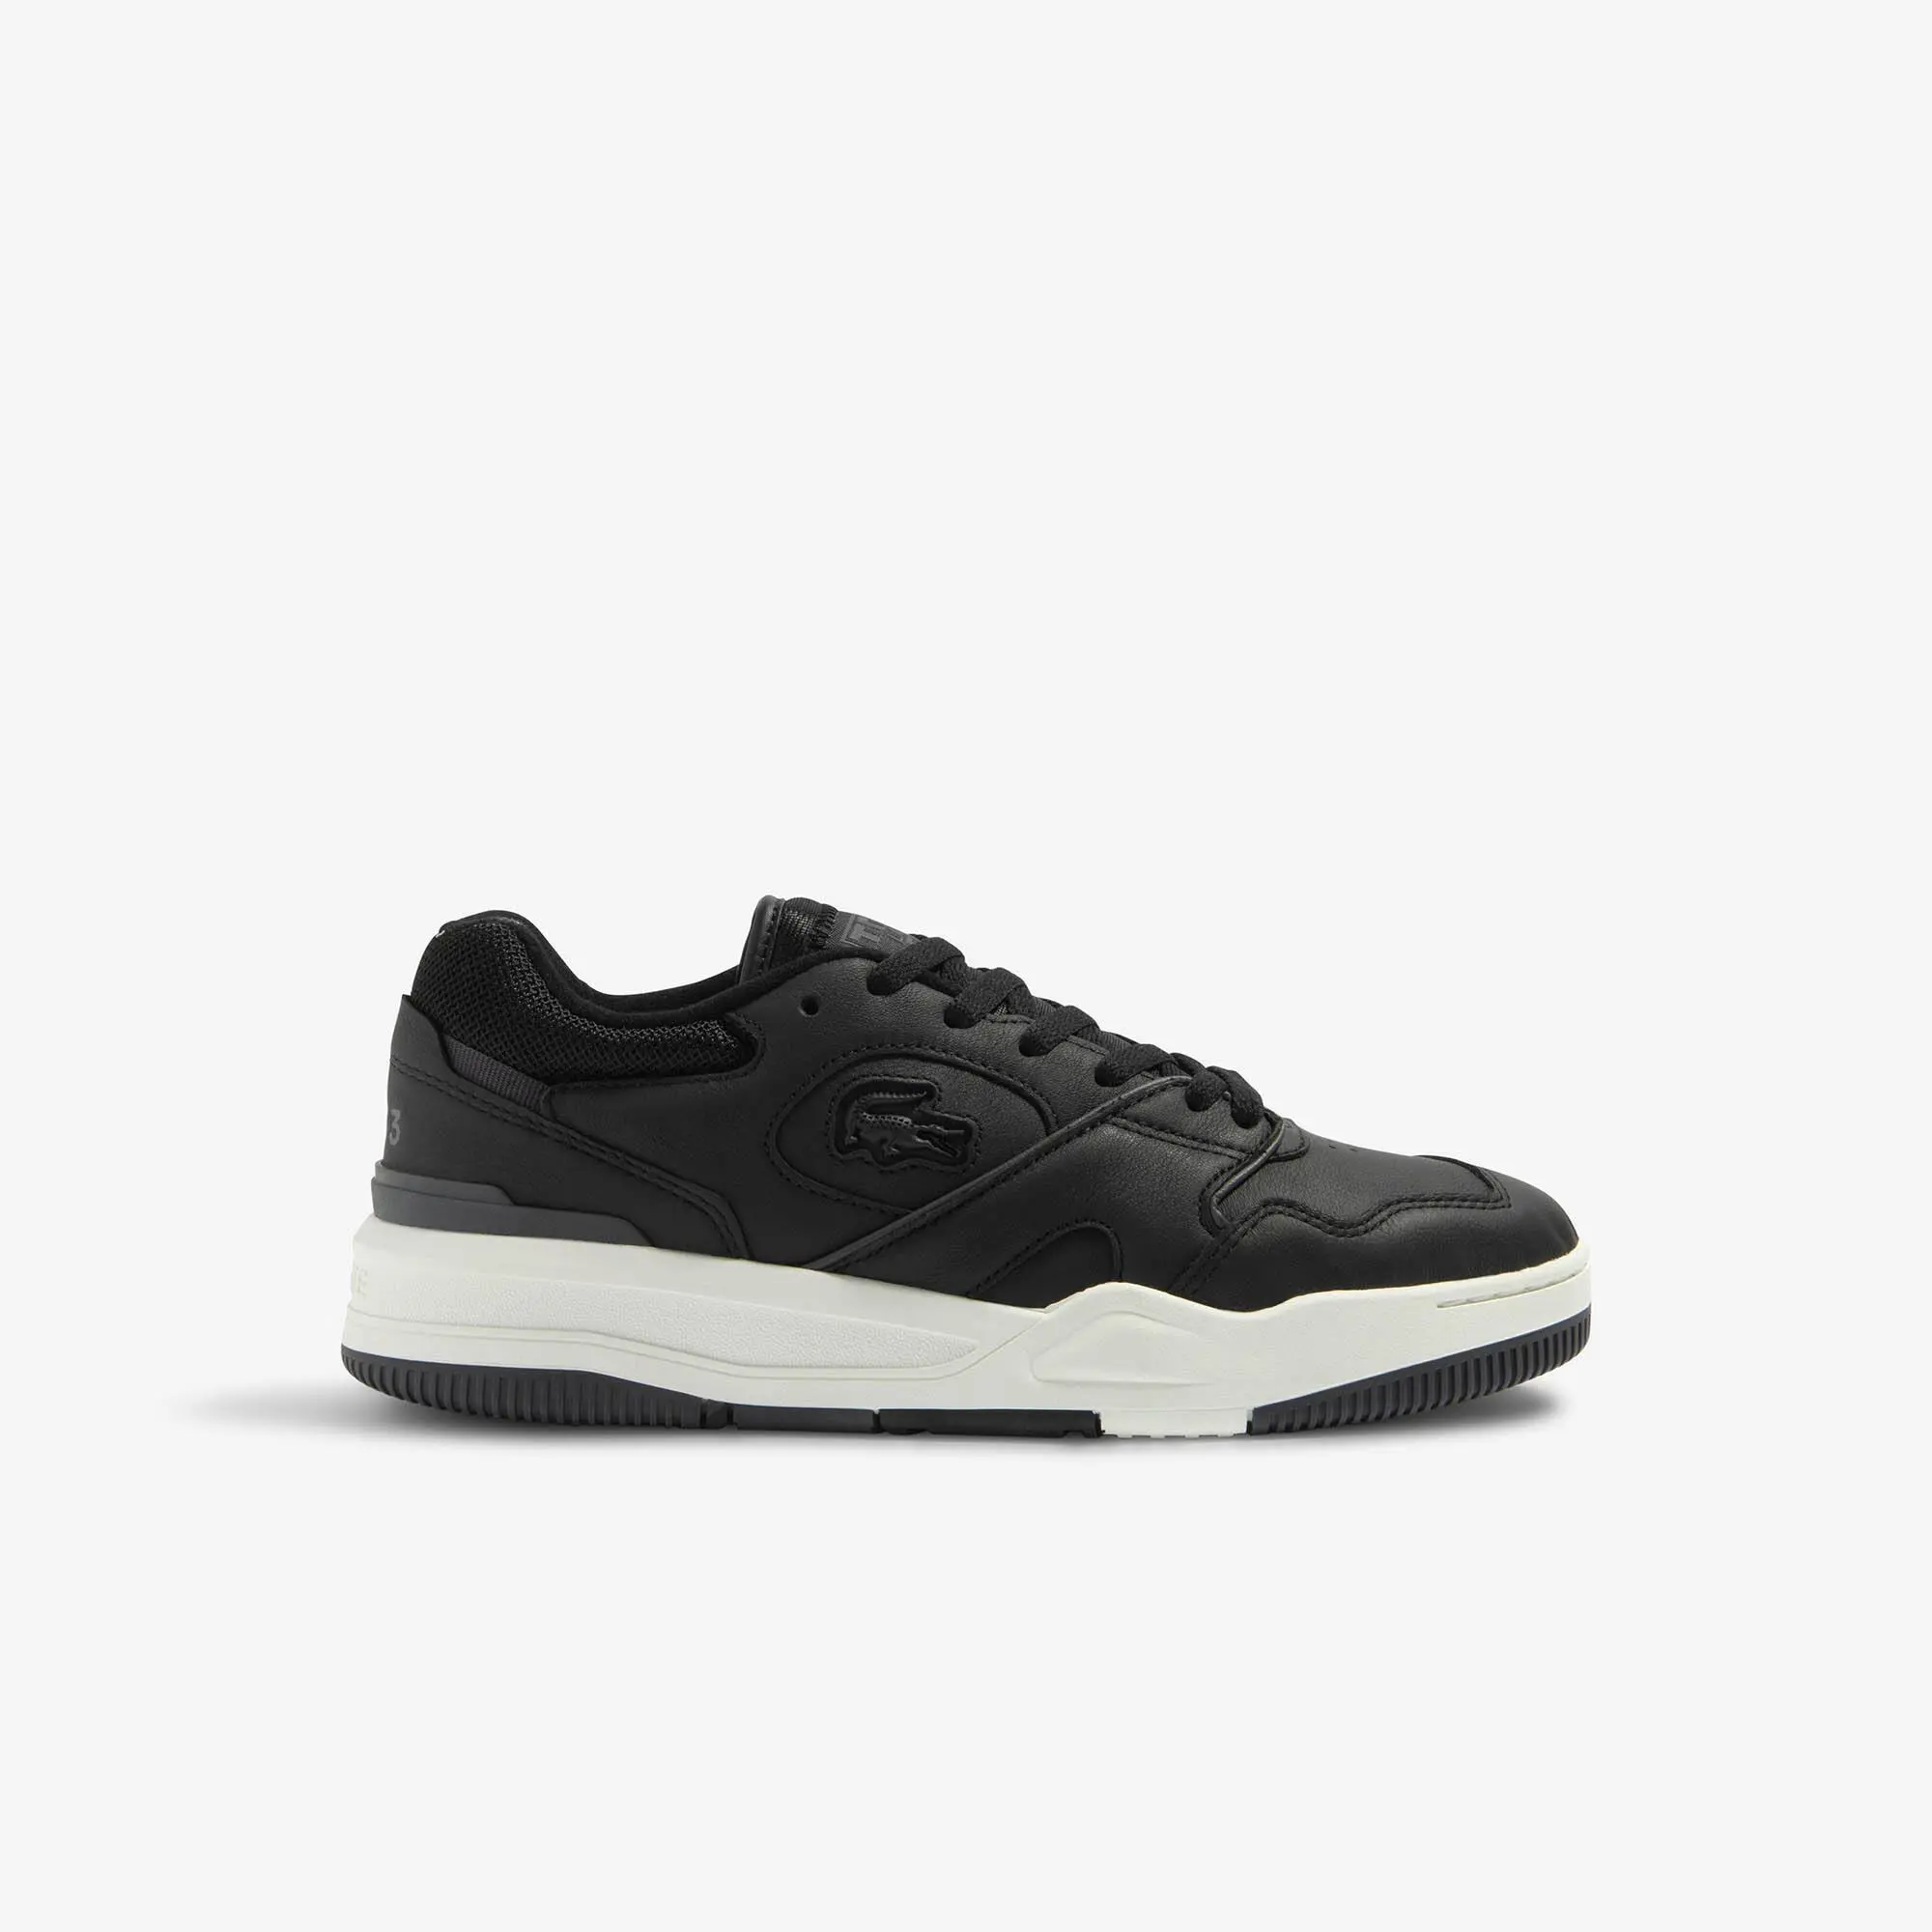 Lacoste Men's Lineshot Leather Trainers. 1